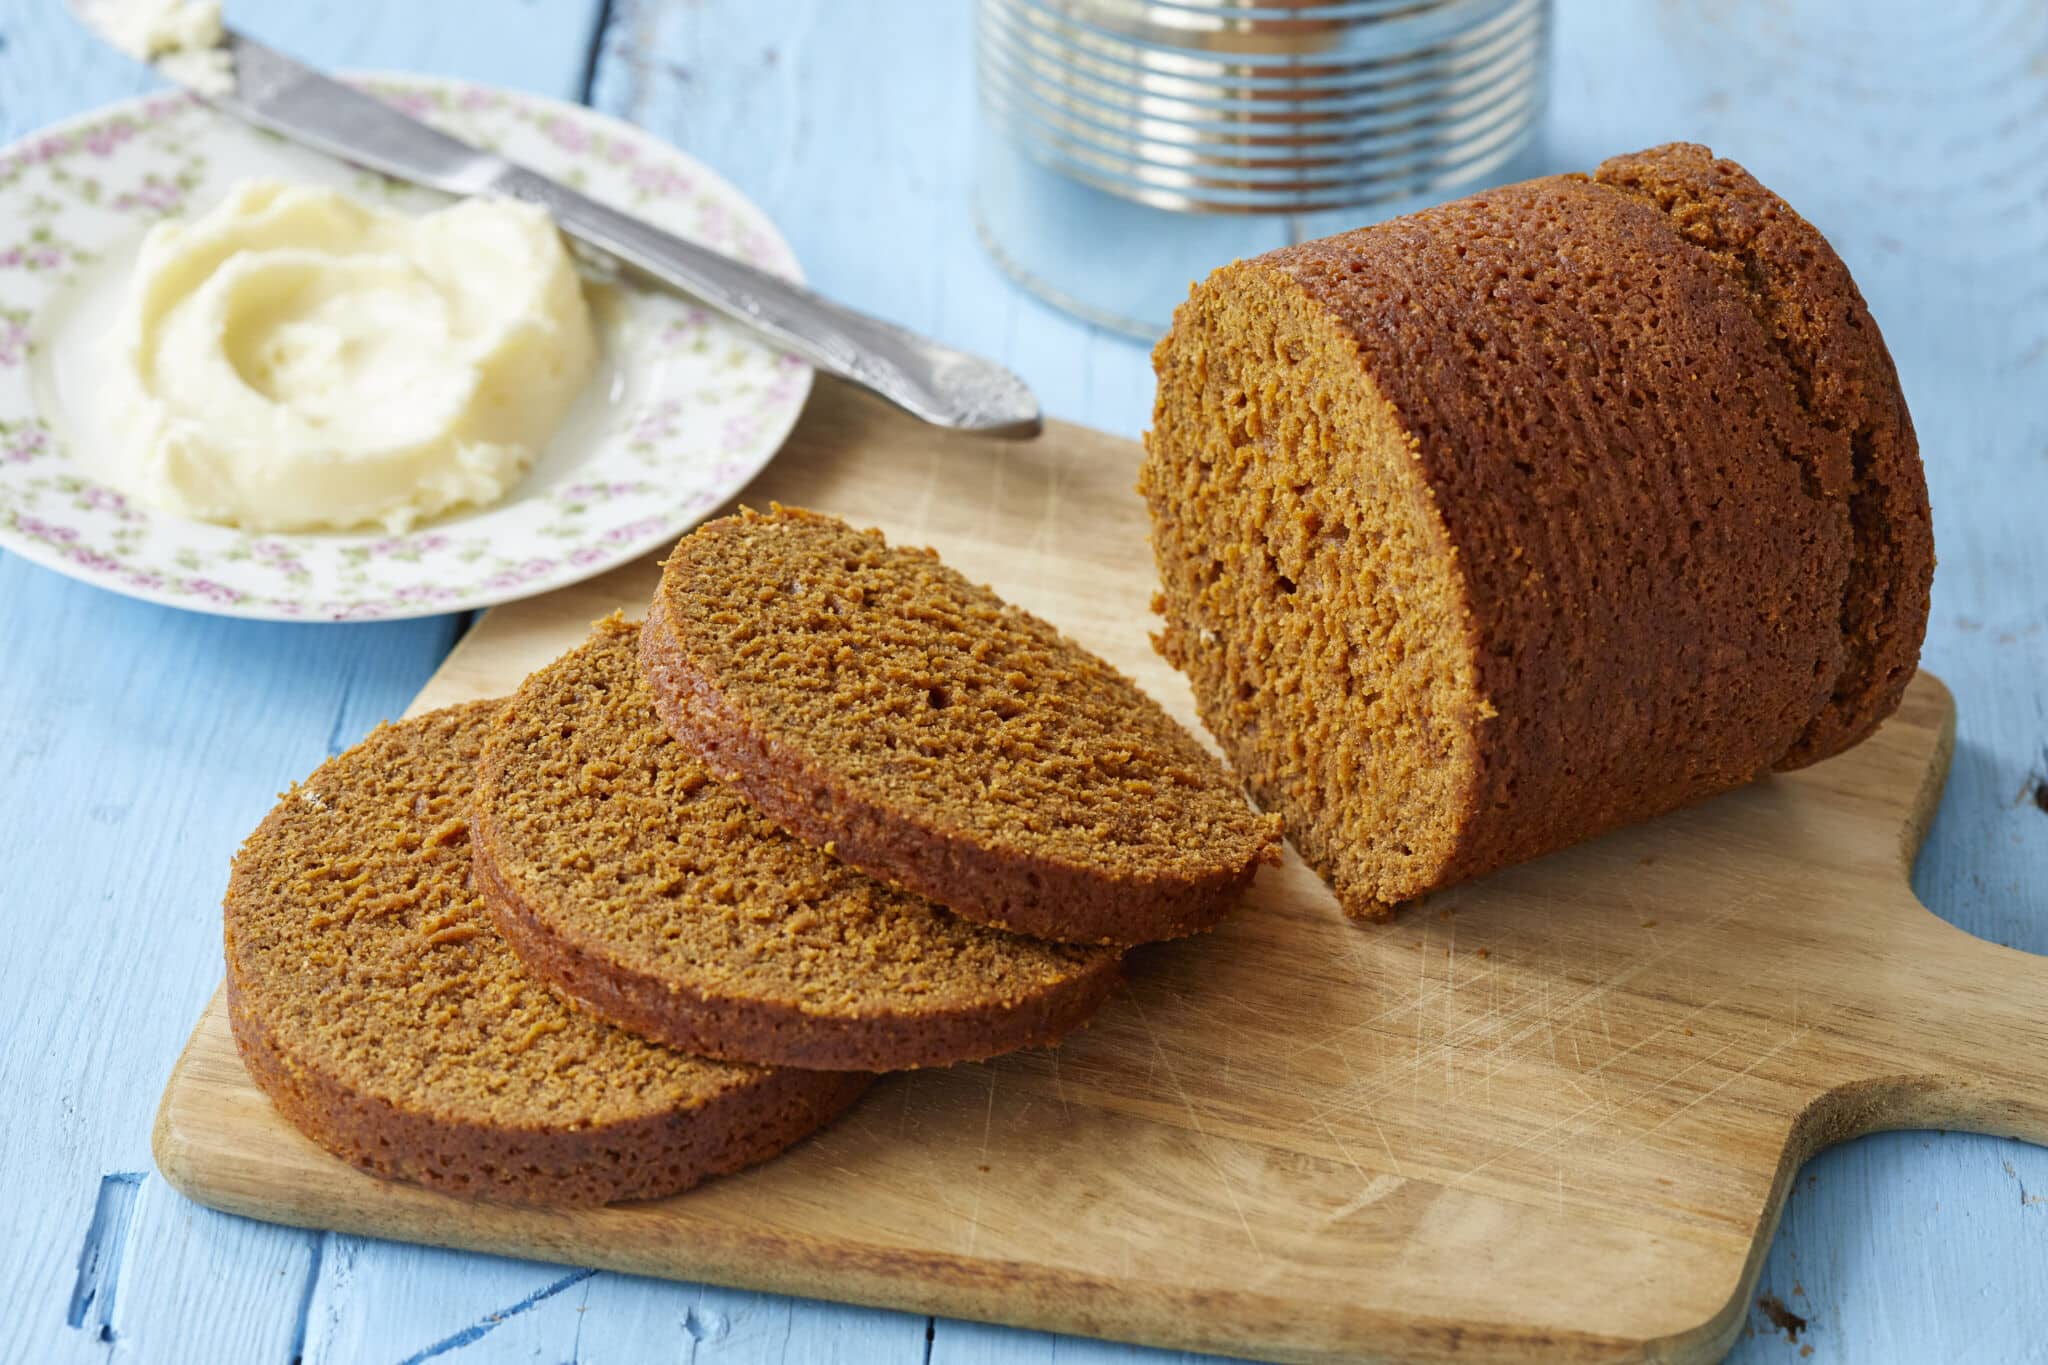 Boston Brown Bread in a can is steamed perfectly with a pleasantly coarse crumb, a note of comforting sweetness, and a rich, dark color.